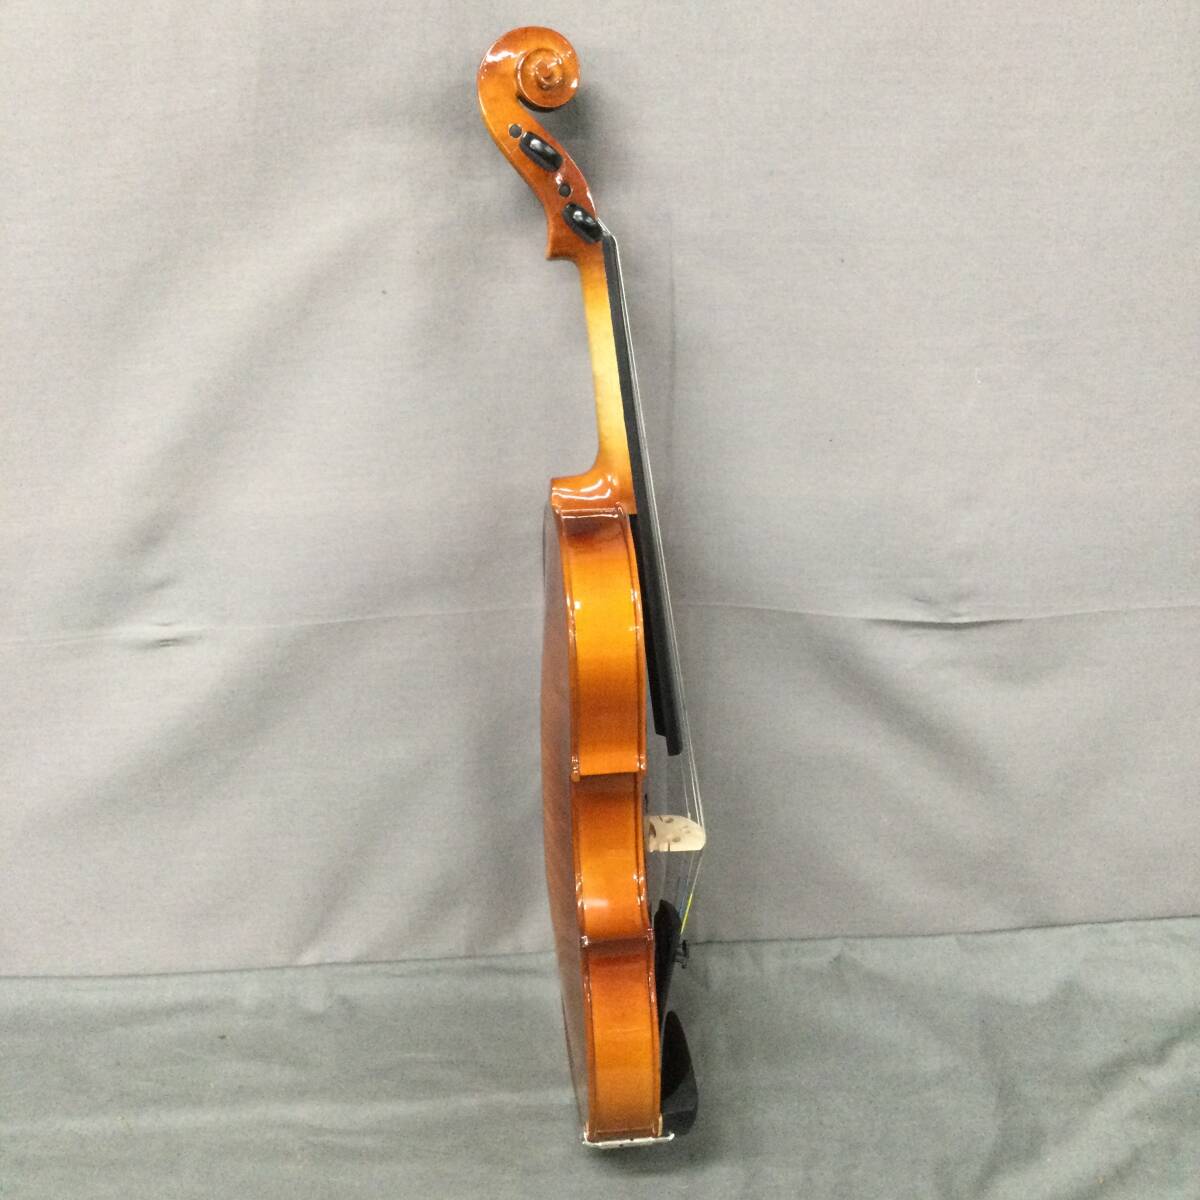 060516 265875-3 STENTOR MUSIC Co.LTD.va Io Lynn violin stringed instruments music case attaching total length approximately 59cm USED goods 